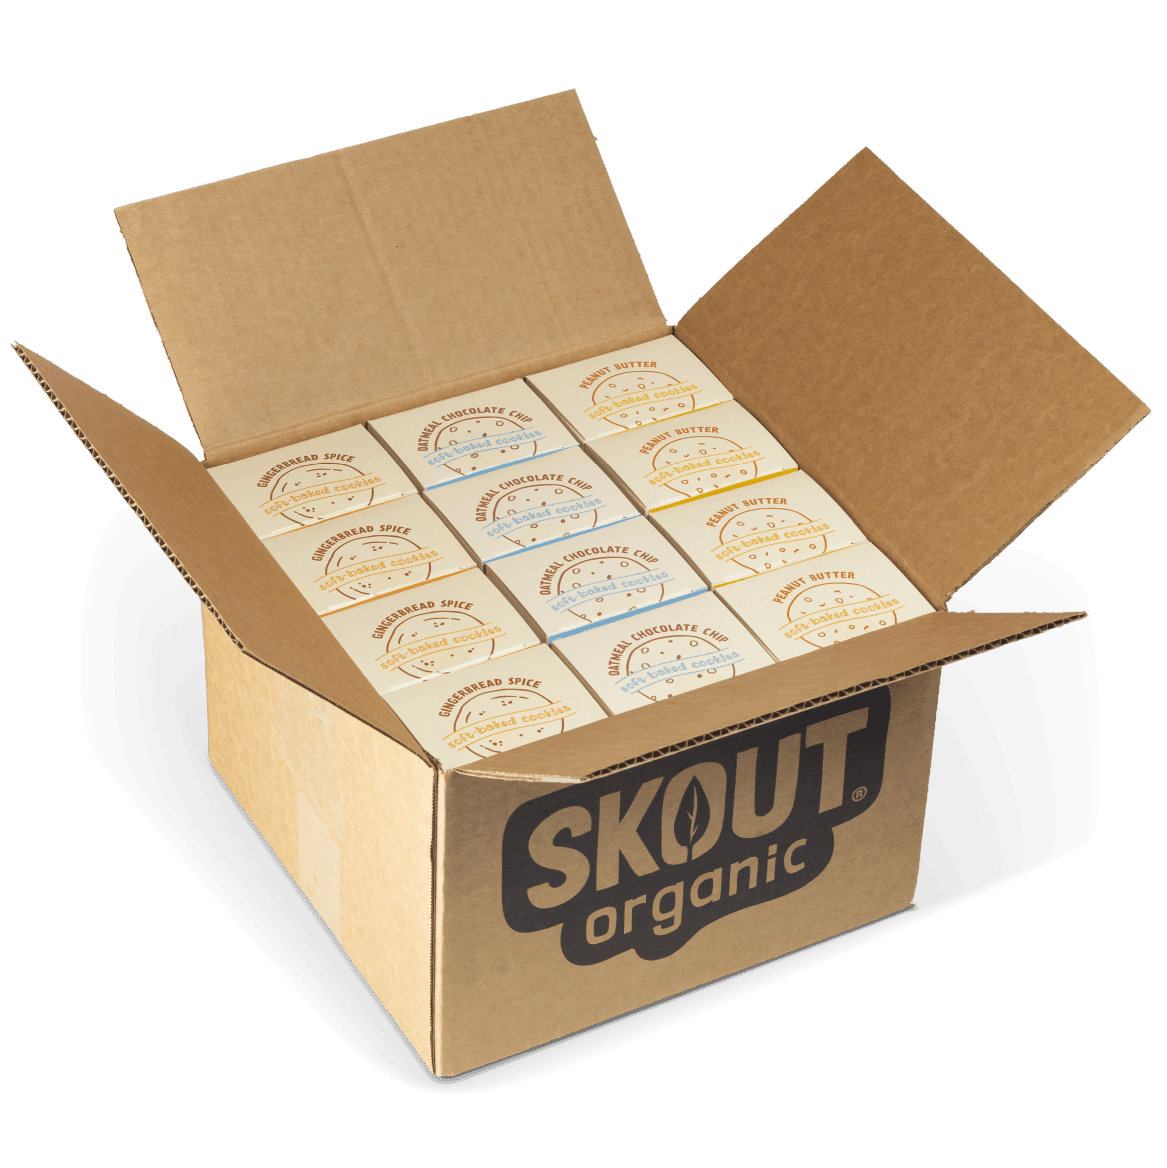 Skout Organic Soft Baked Cookie Build A Box - 12 Pack